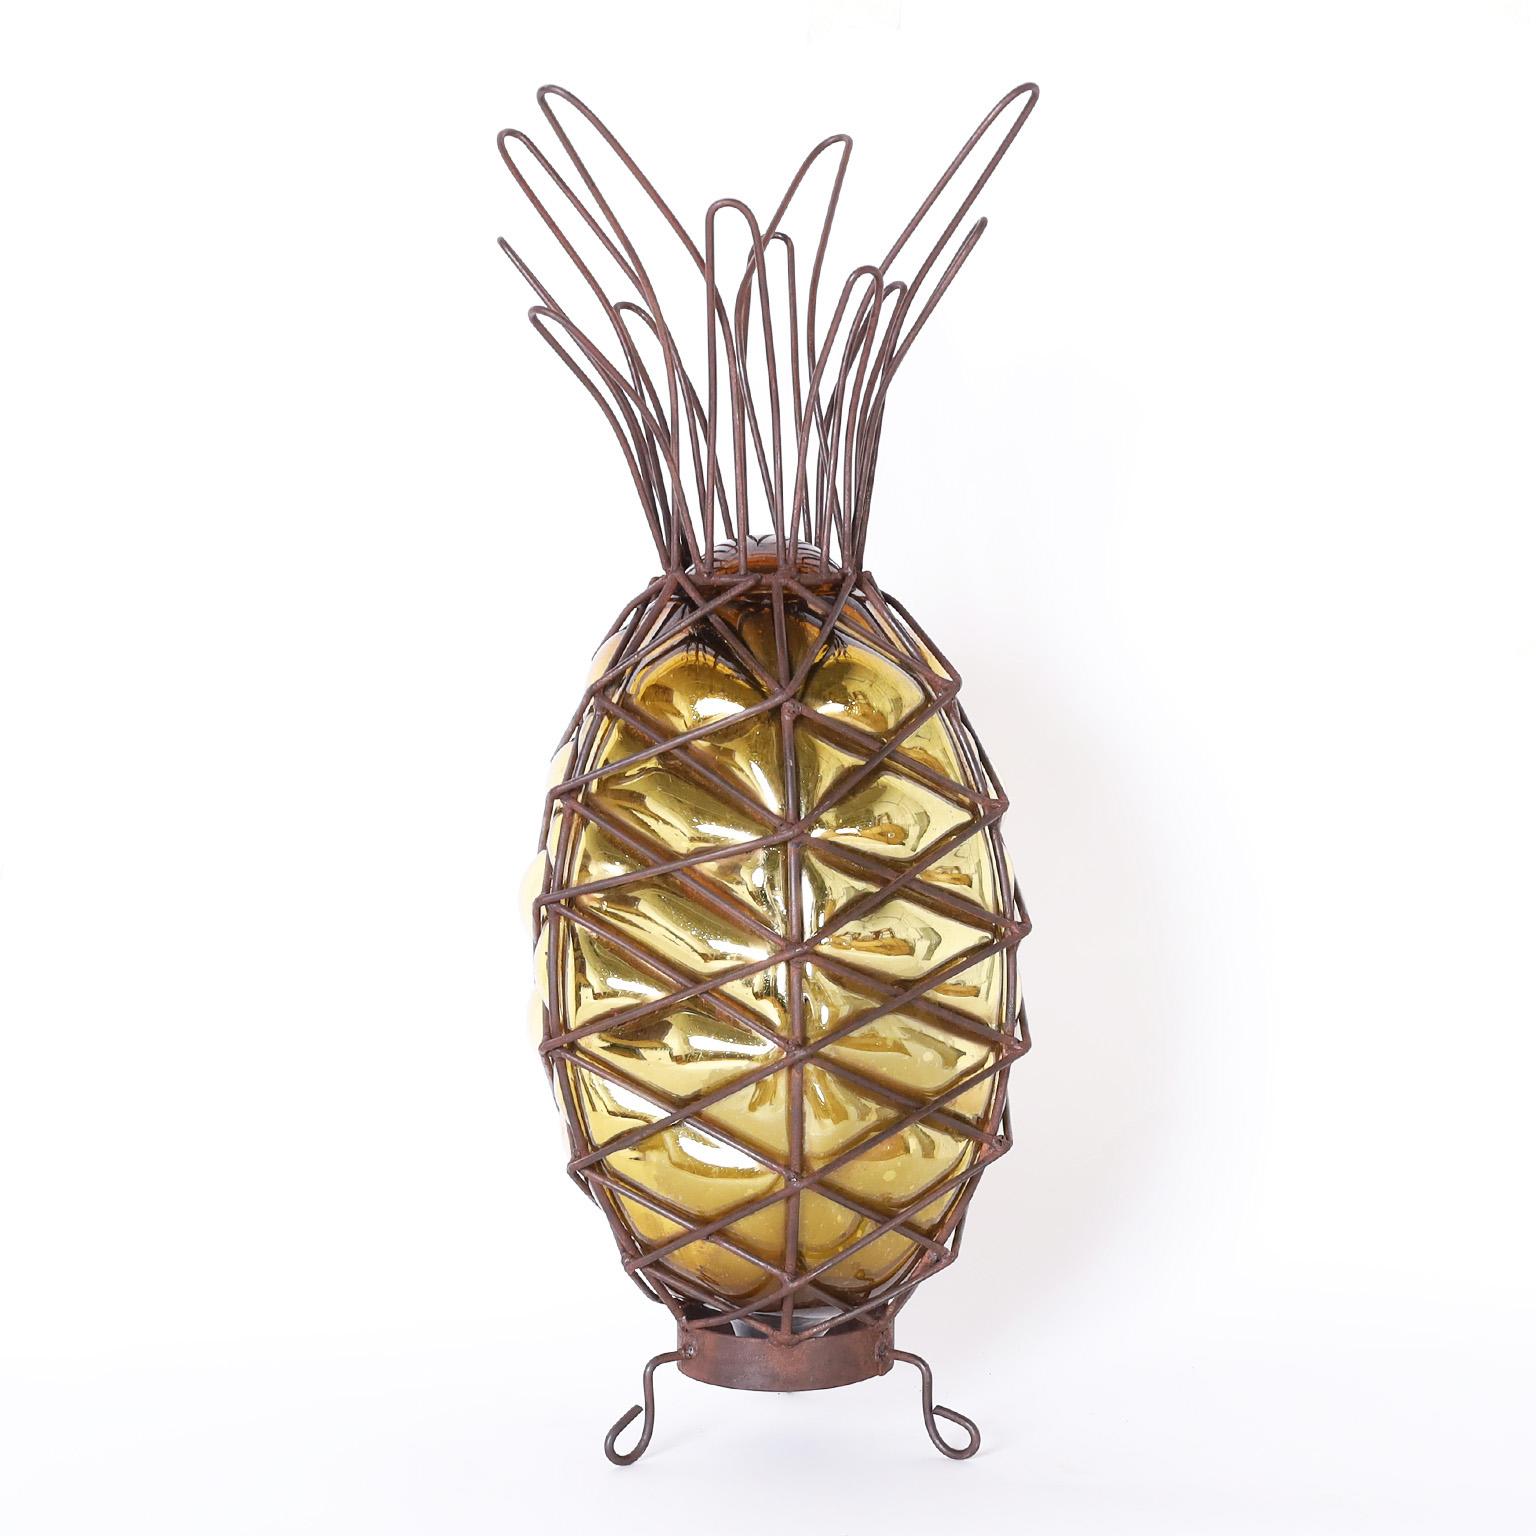 Standout pair of decorative pineapples hand crafted with a stylized metal frame having gold tone mercury glass blown into it.